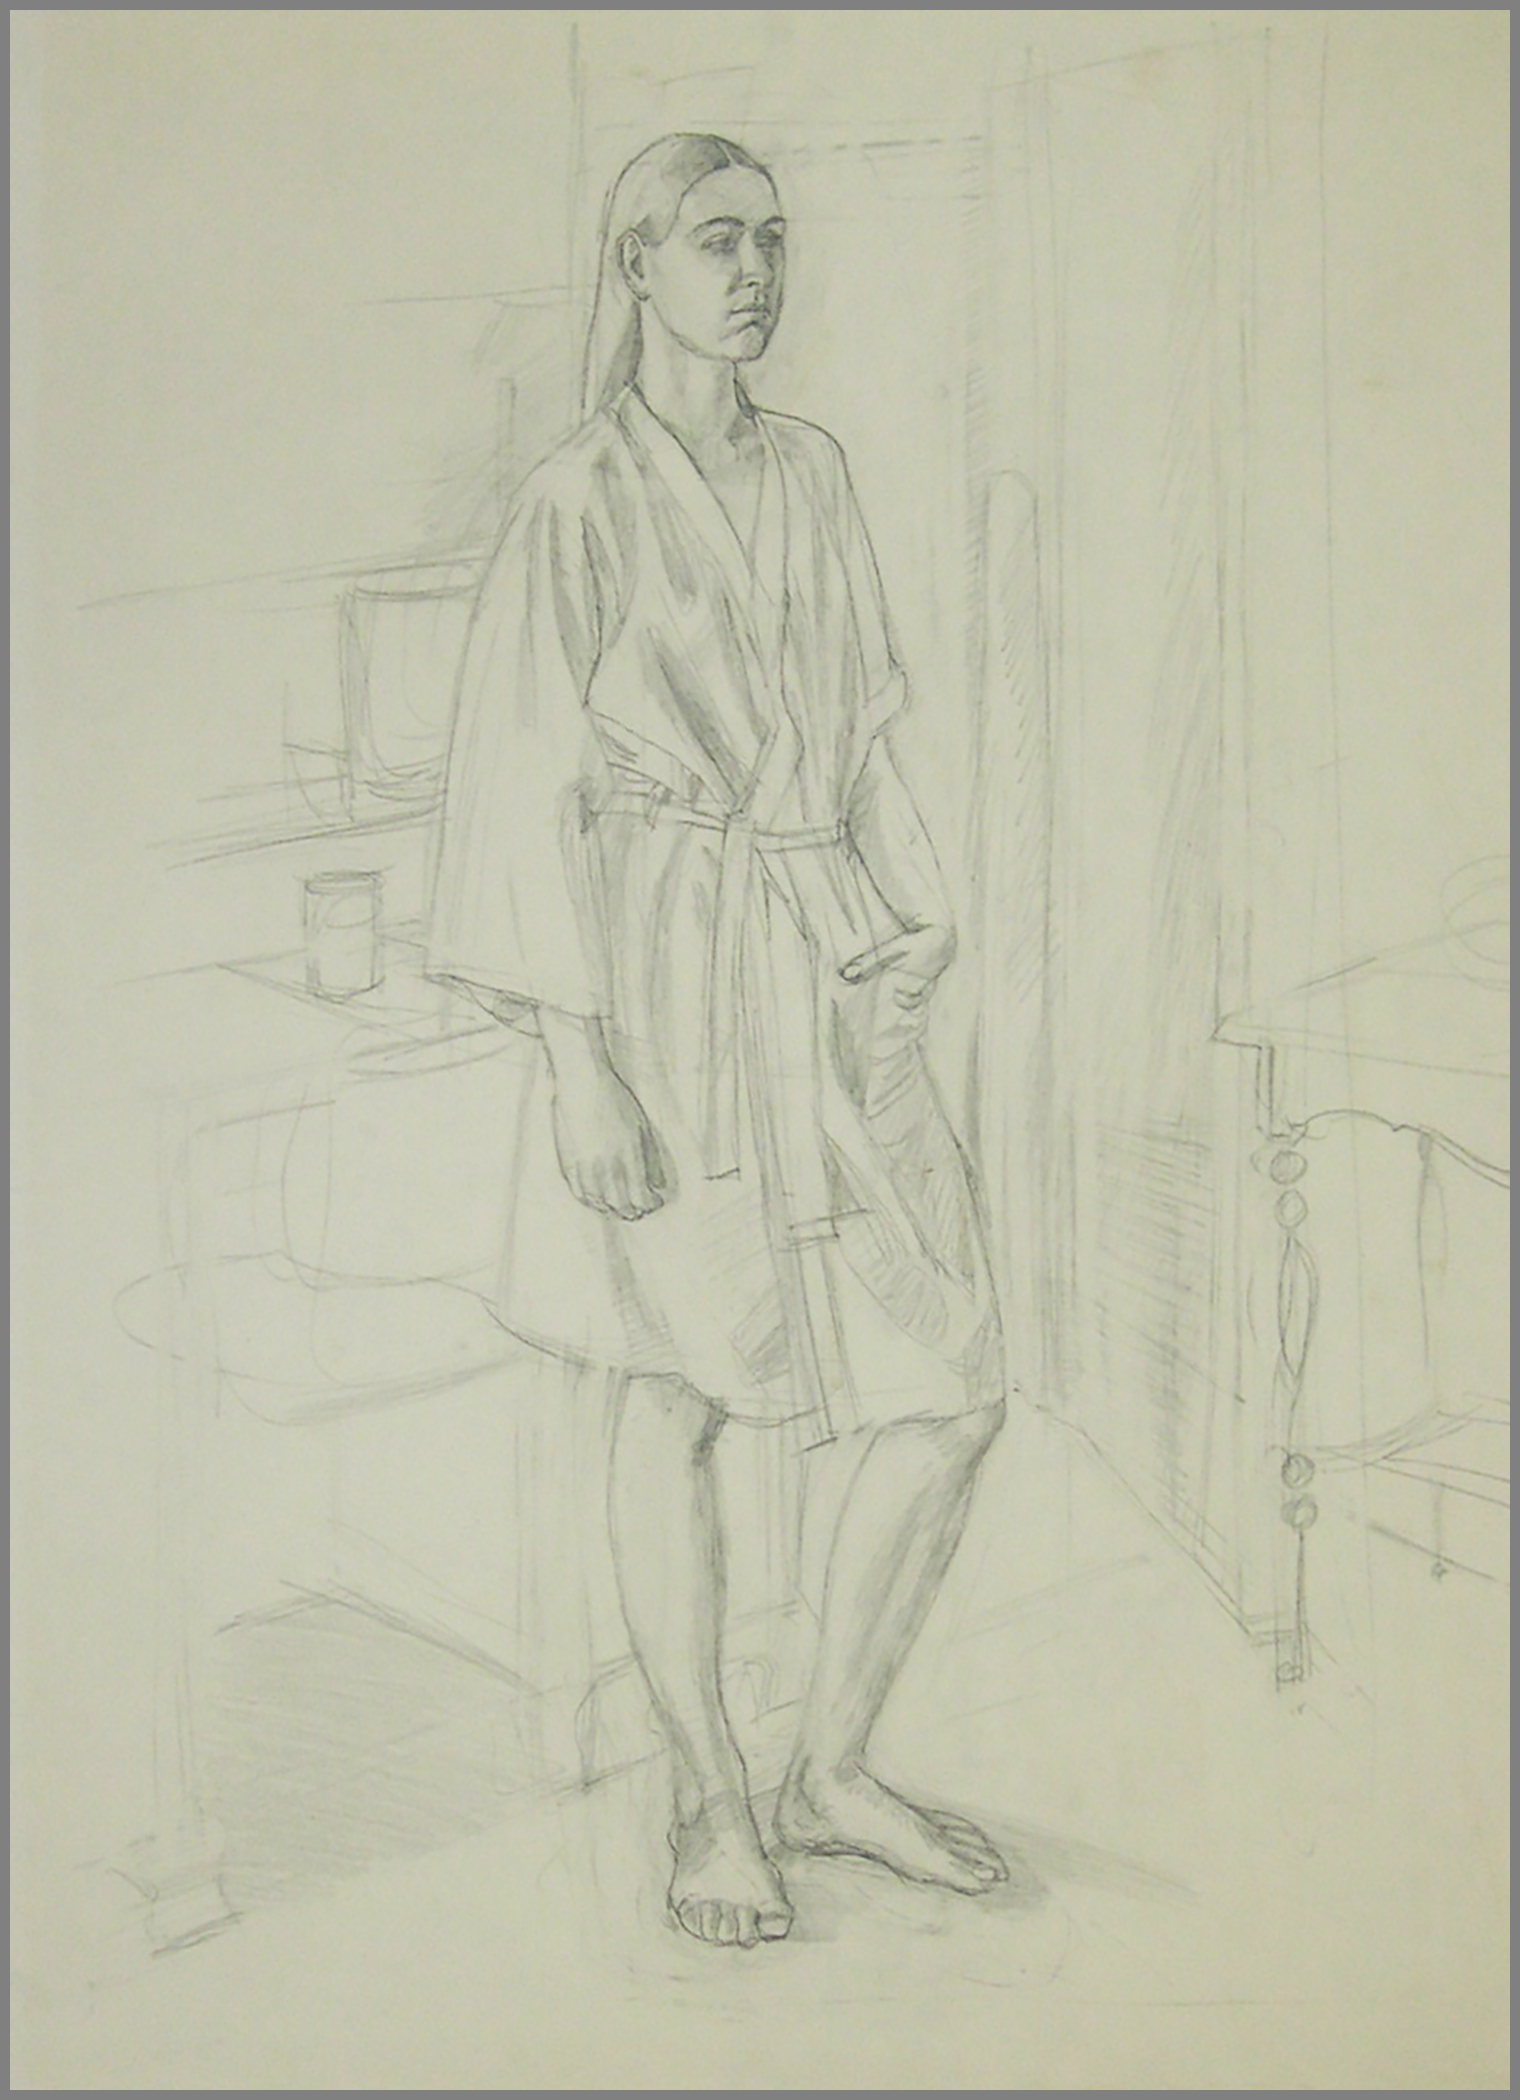  Standing Figure, pencil, 24 x 18 inches 